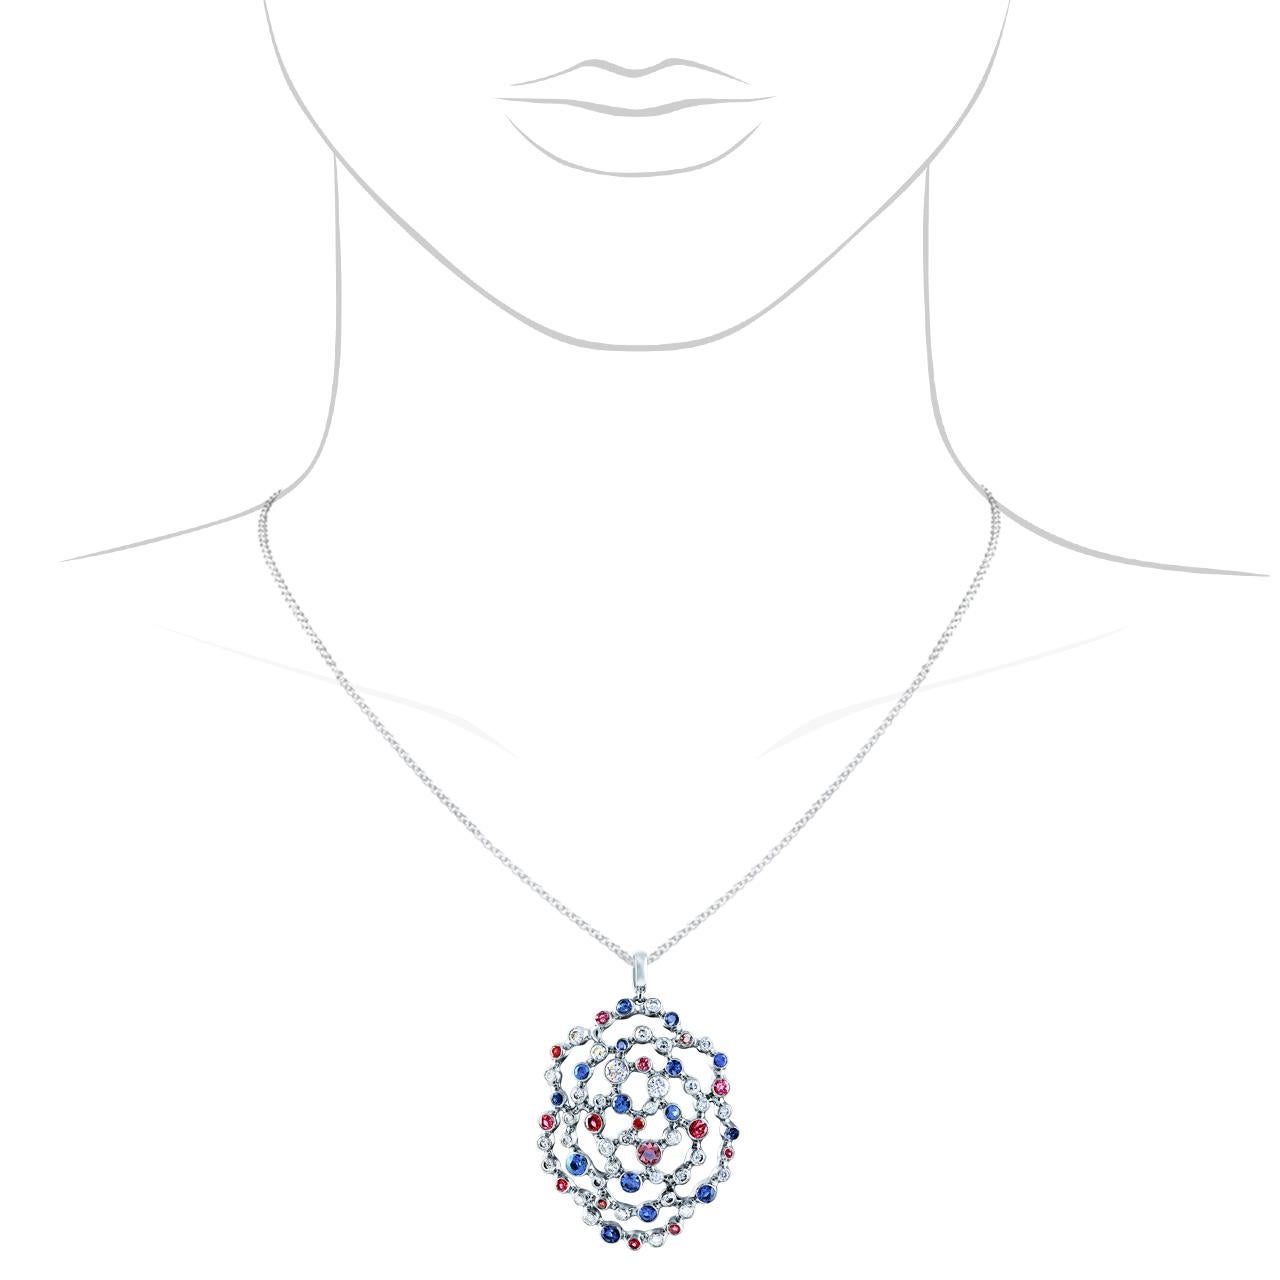 - 35 Round Diamonds - 1,015 ct, G/VVS1-VVS2
- 16 Round Rubies - 0,69 ct
- 14 Round Sapphires - 0,71 ct
- 18K White Gold 
- Weight: 8,34 g
This elegant pendant from the Byzantium collection is encrusted with 1,015 ct of diamonds, 0,71 ct of sapphires